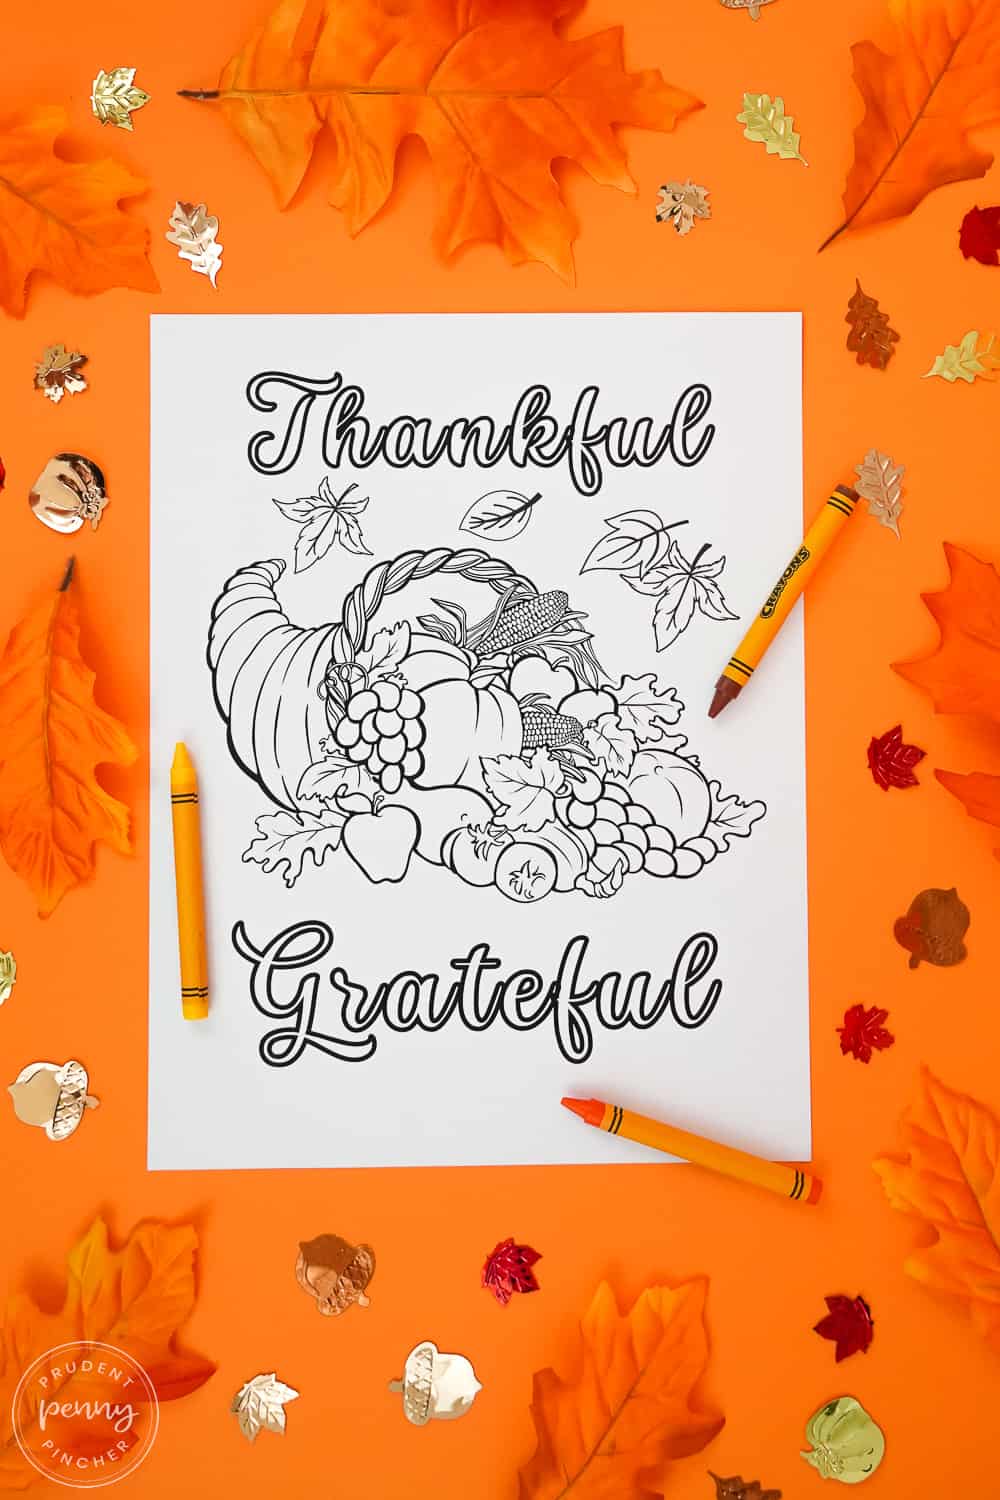 Coloring page of thankful and thankful words with a cornucopia for thanksgiving